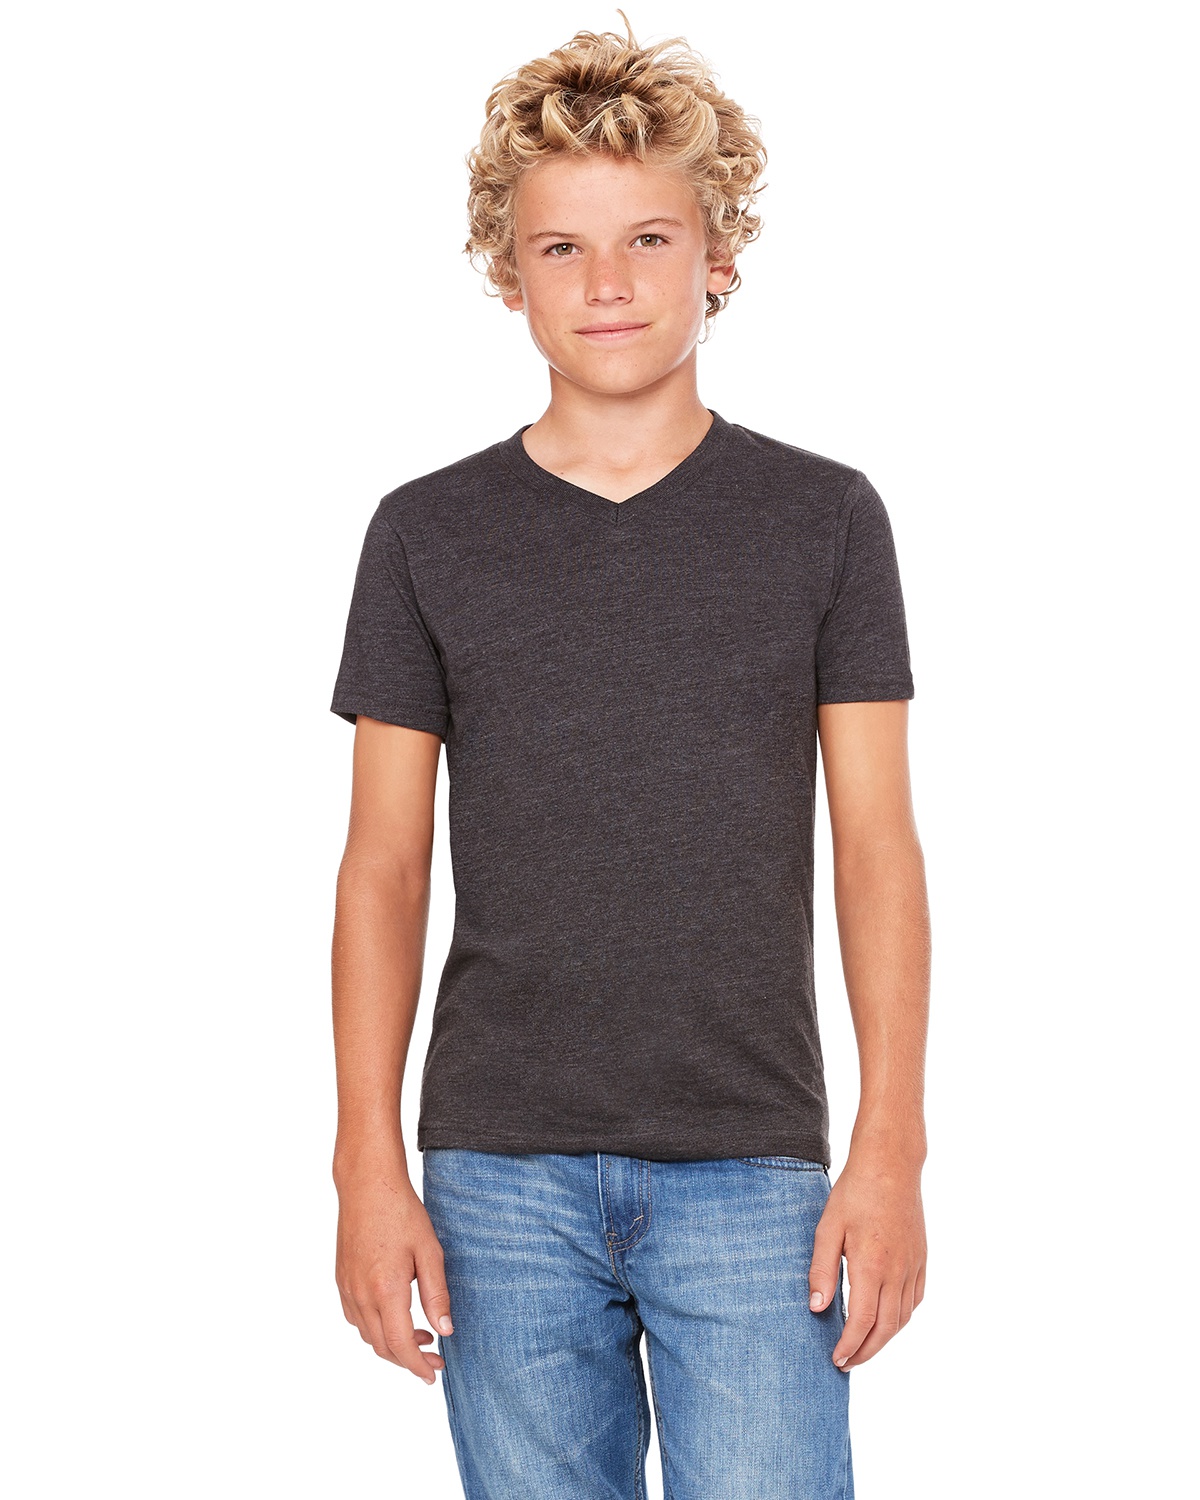 'Bella Canvas 3005Y Youth Jersey Short-Sleeve V-Neck T-Shirt'